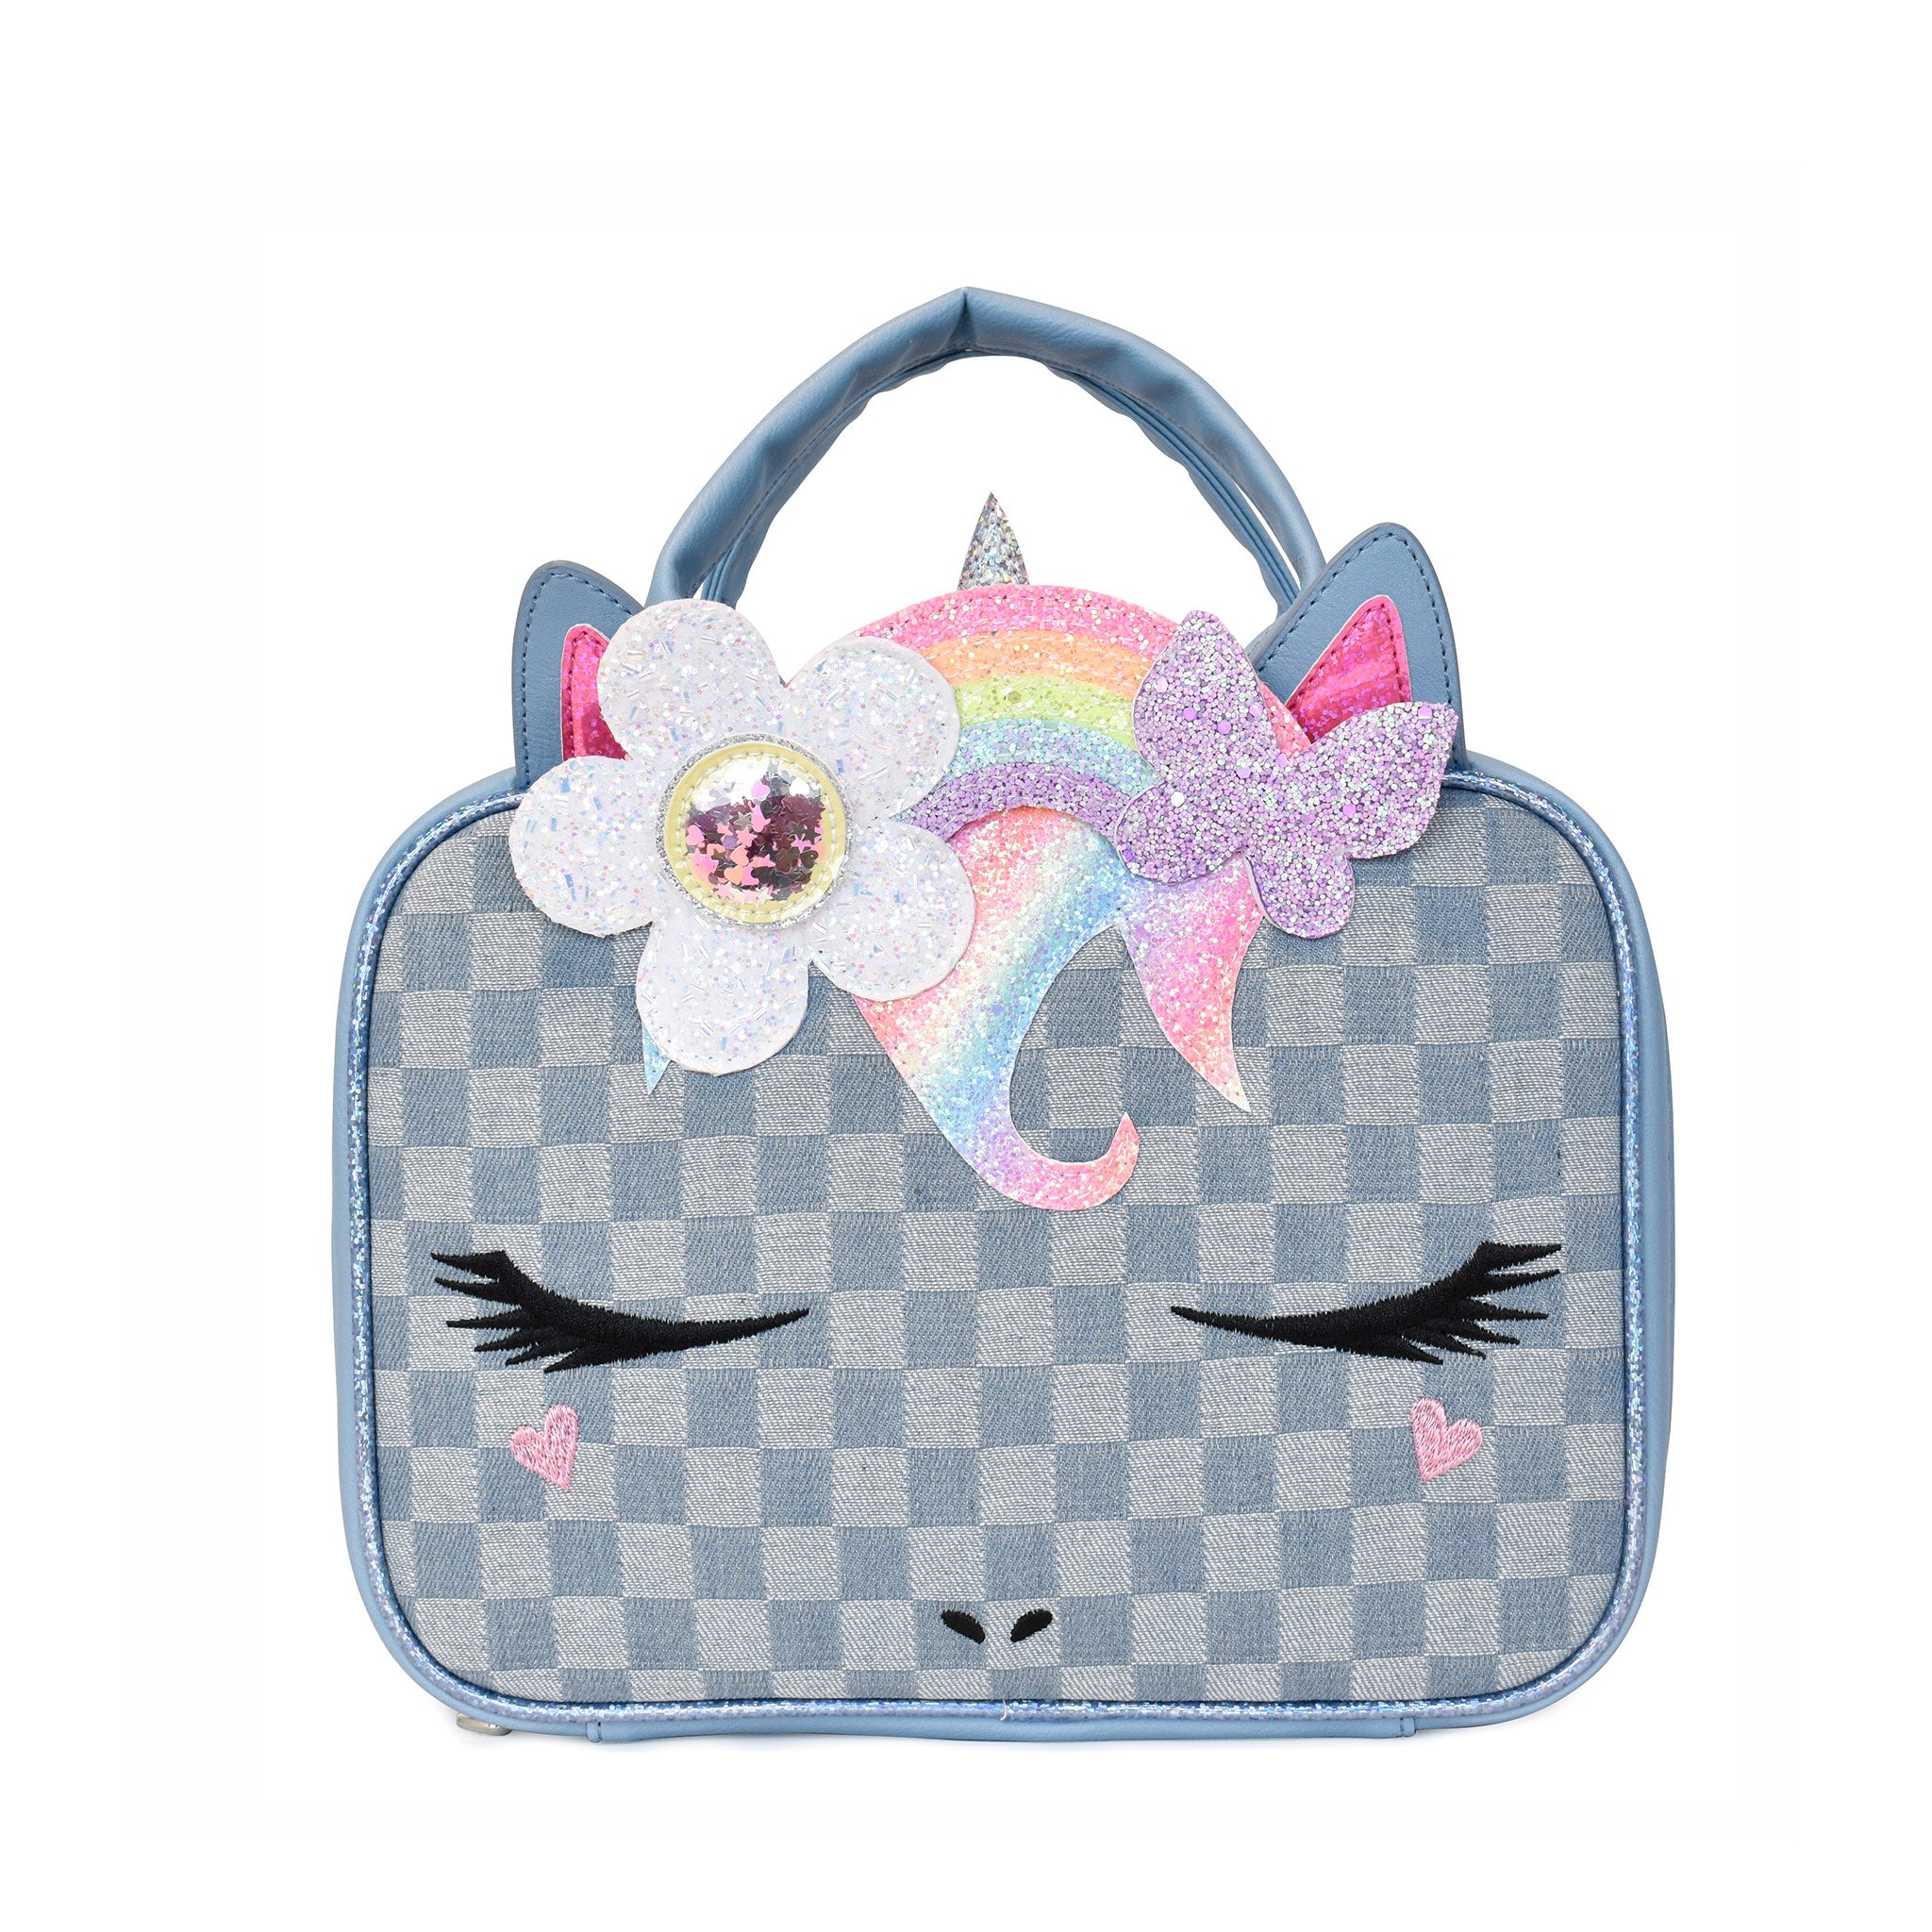 Front view of a unicorn face denim checkerboard print lunch bag with a daisy rainbow crown applique